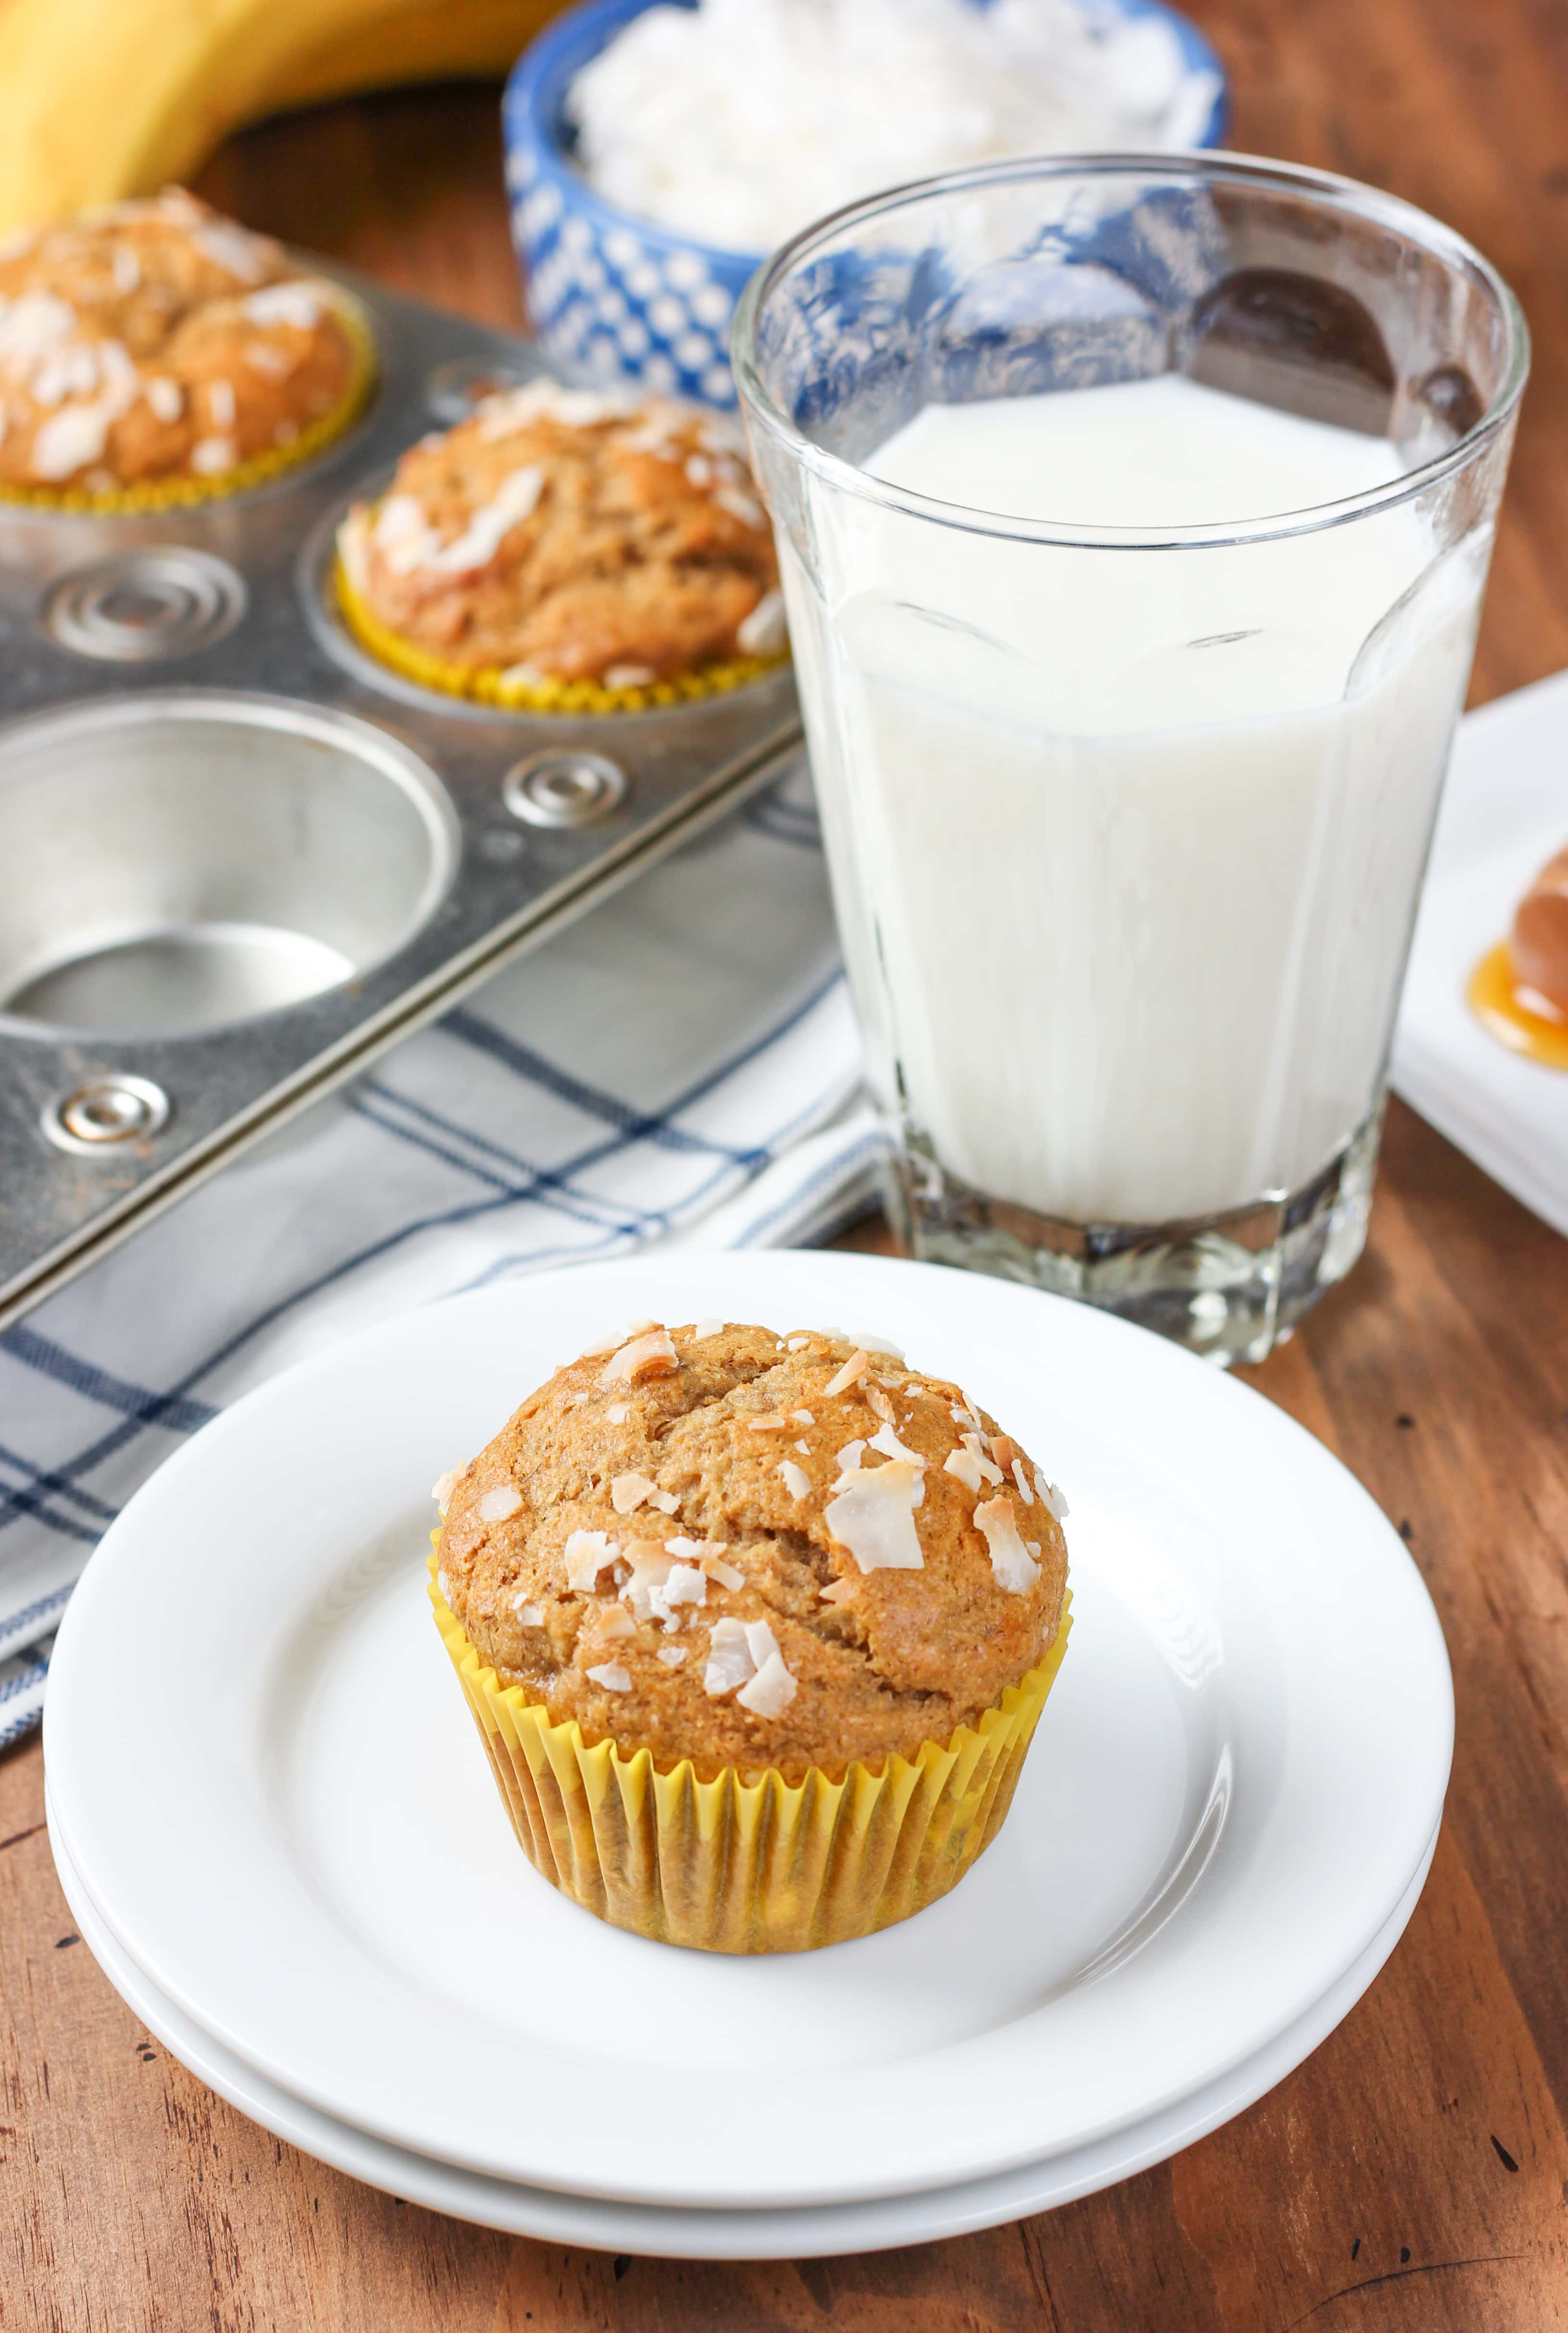 Whole Wheat Peanut Butter Banana Protein Muffins Recipe from A Kitchen Addiction